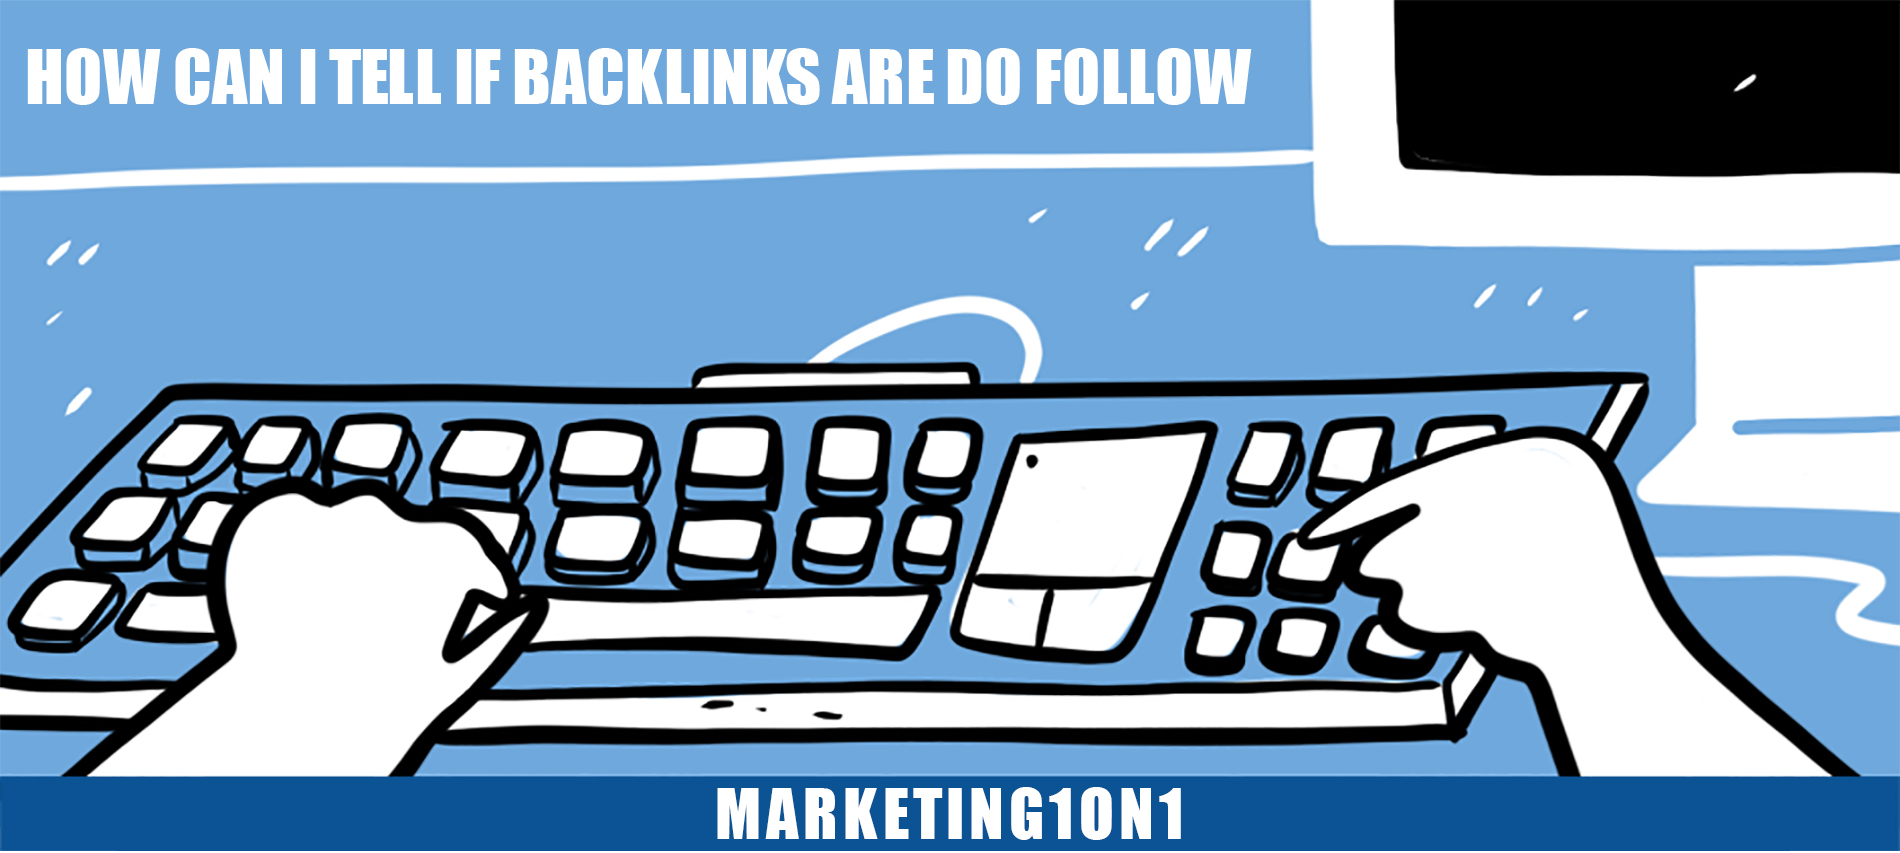 How can I tell if backlinks are do follow?